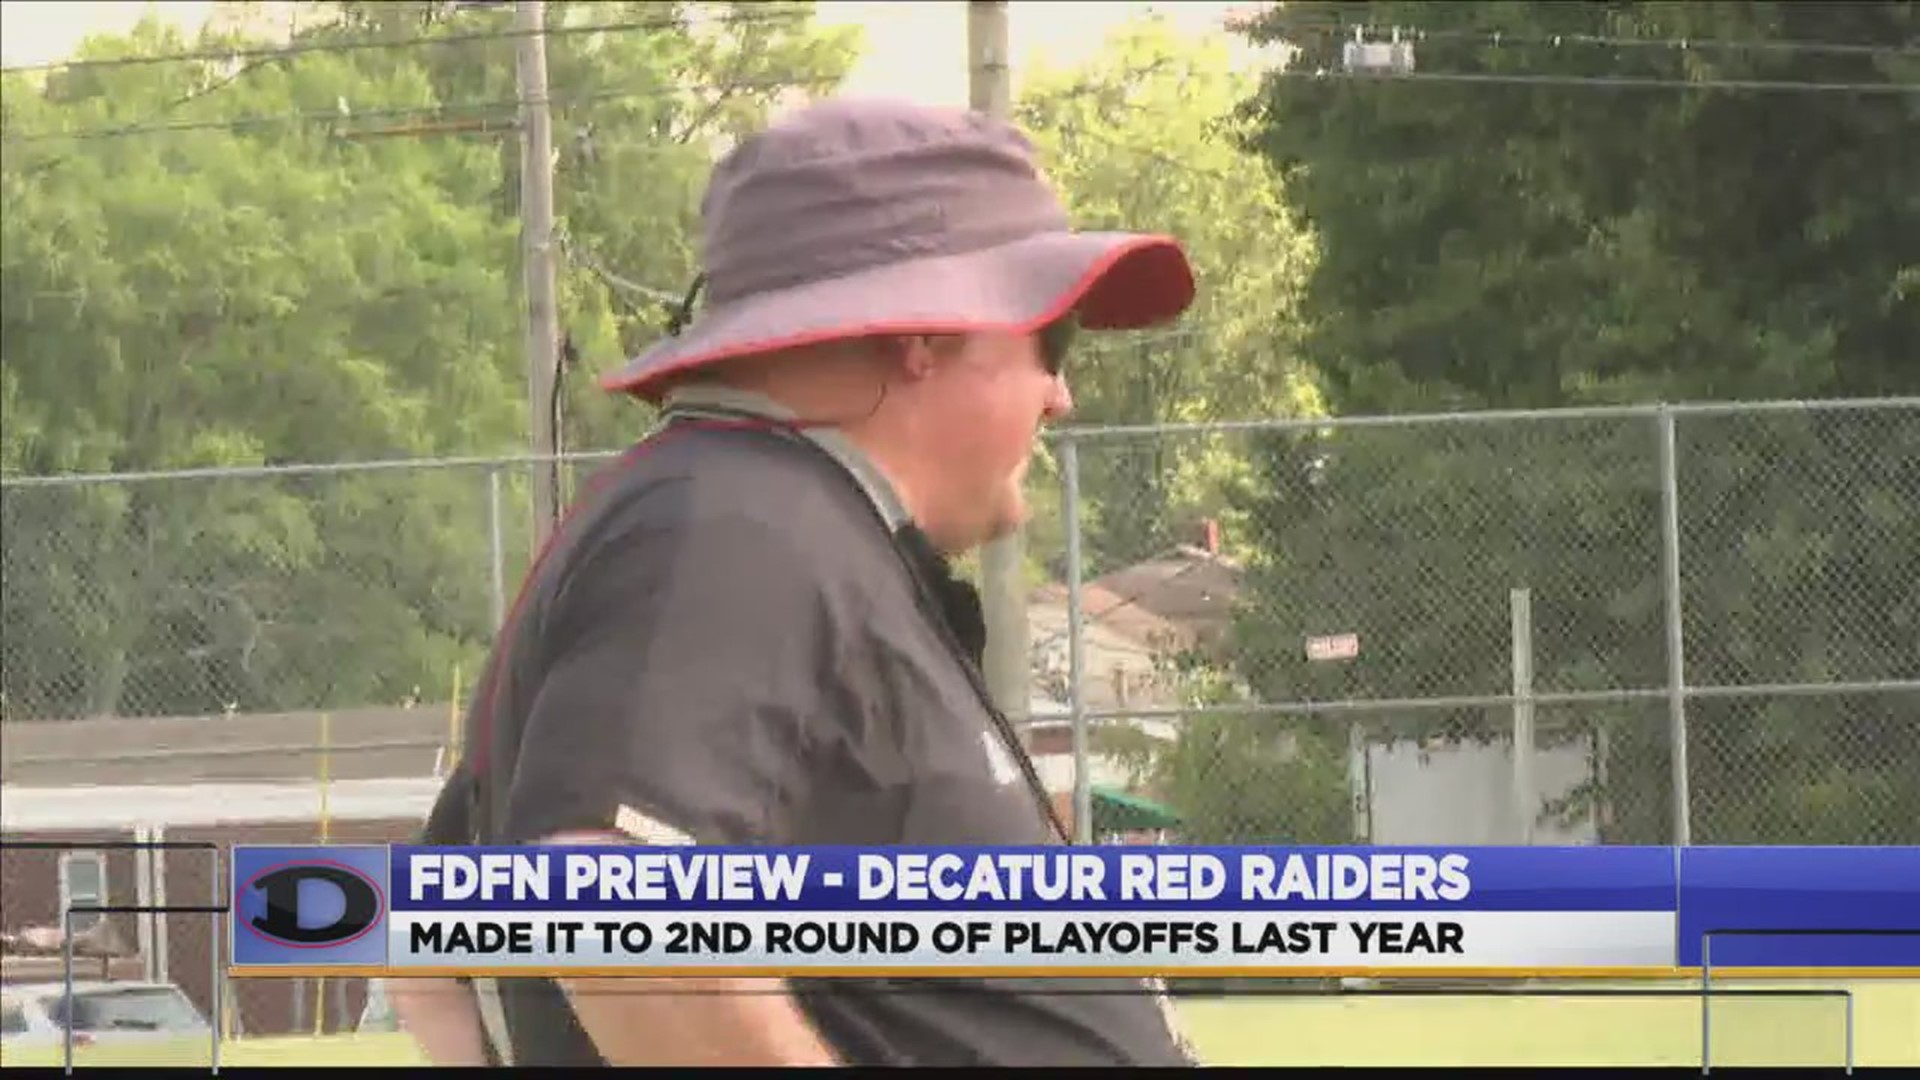 After going 7-5 in 2018, the Decatur Red Raiders are prepared to make a deeper playoff run in 2019